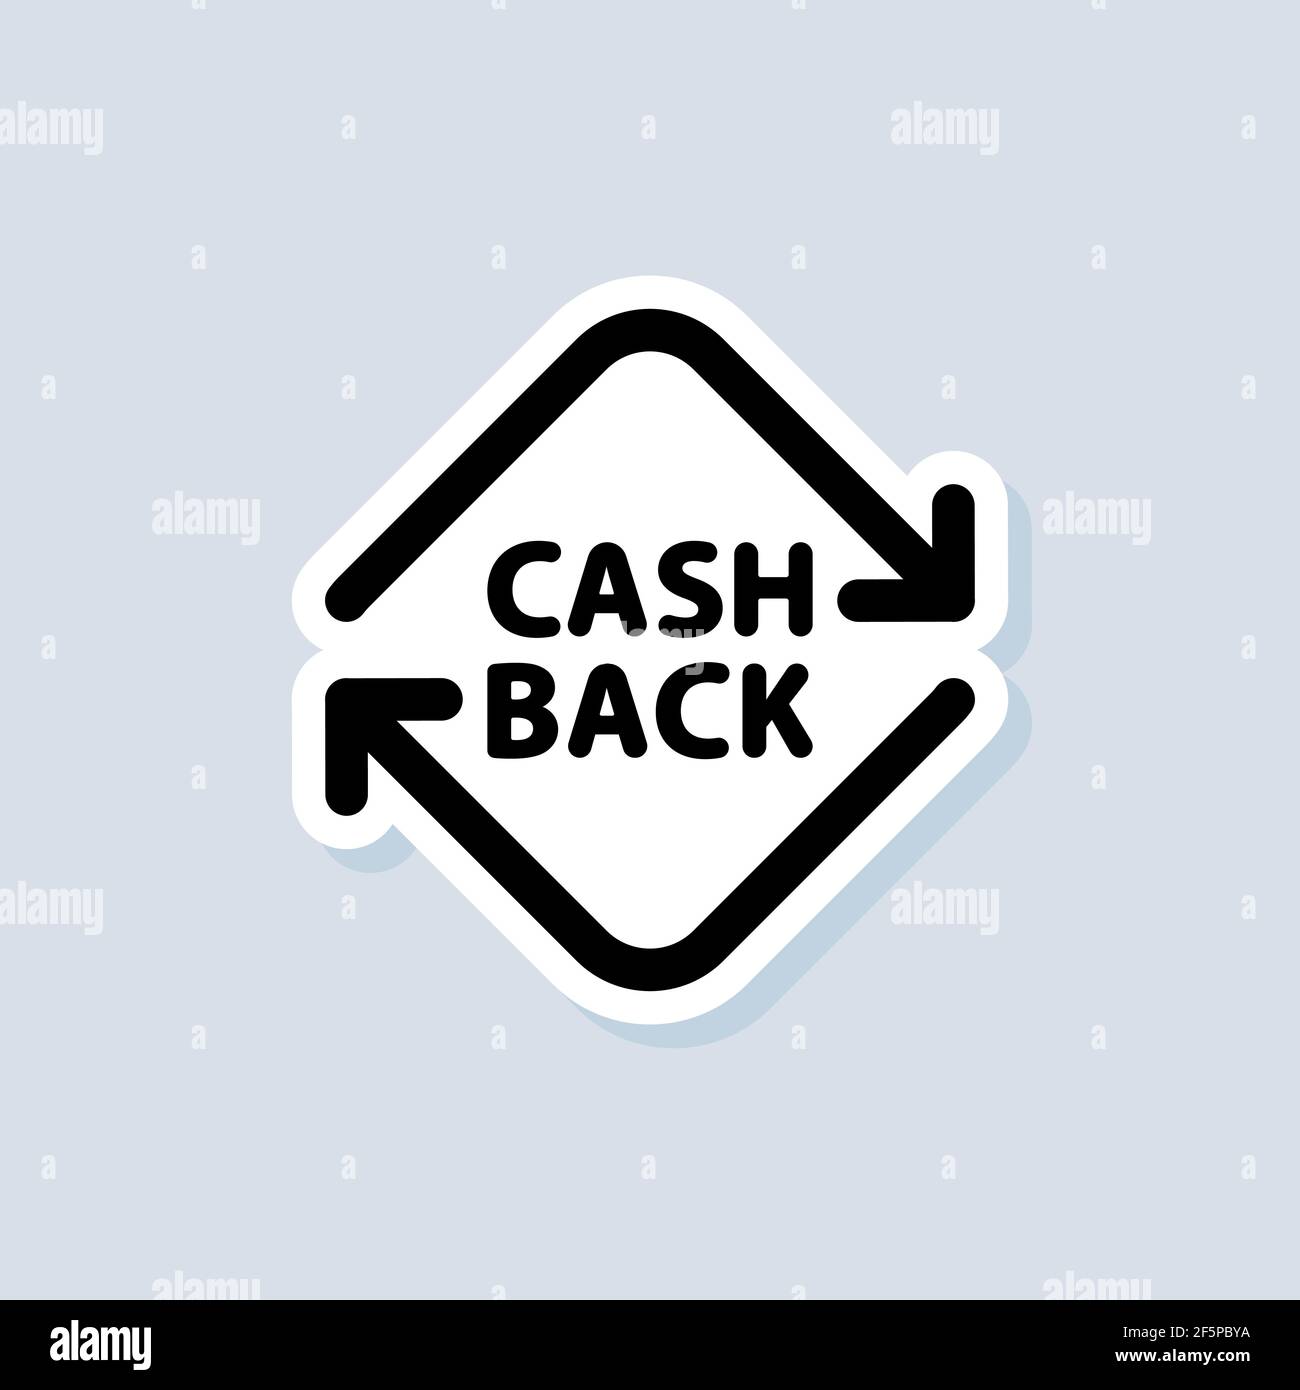 Cashback sticker. Return money. Financial services, money refund, return on investment. Cash back rebate. Savings account, currency exchange. Vector o Stock Vector